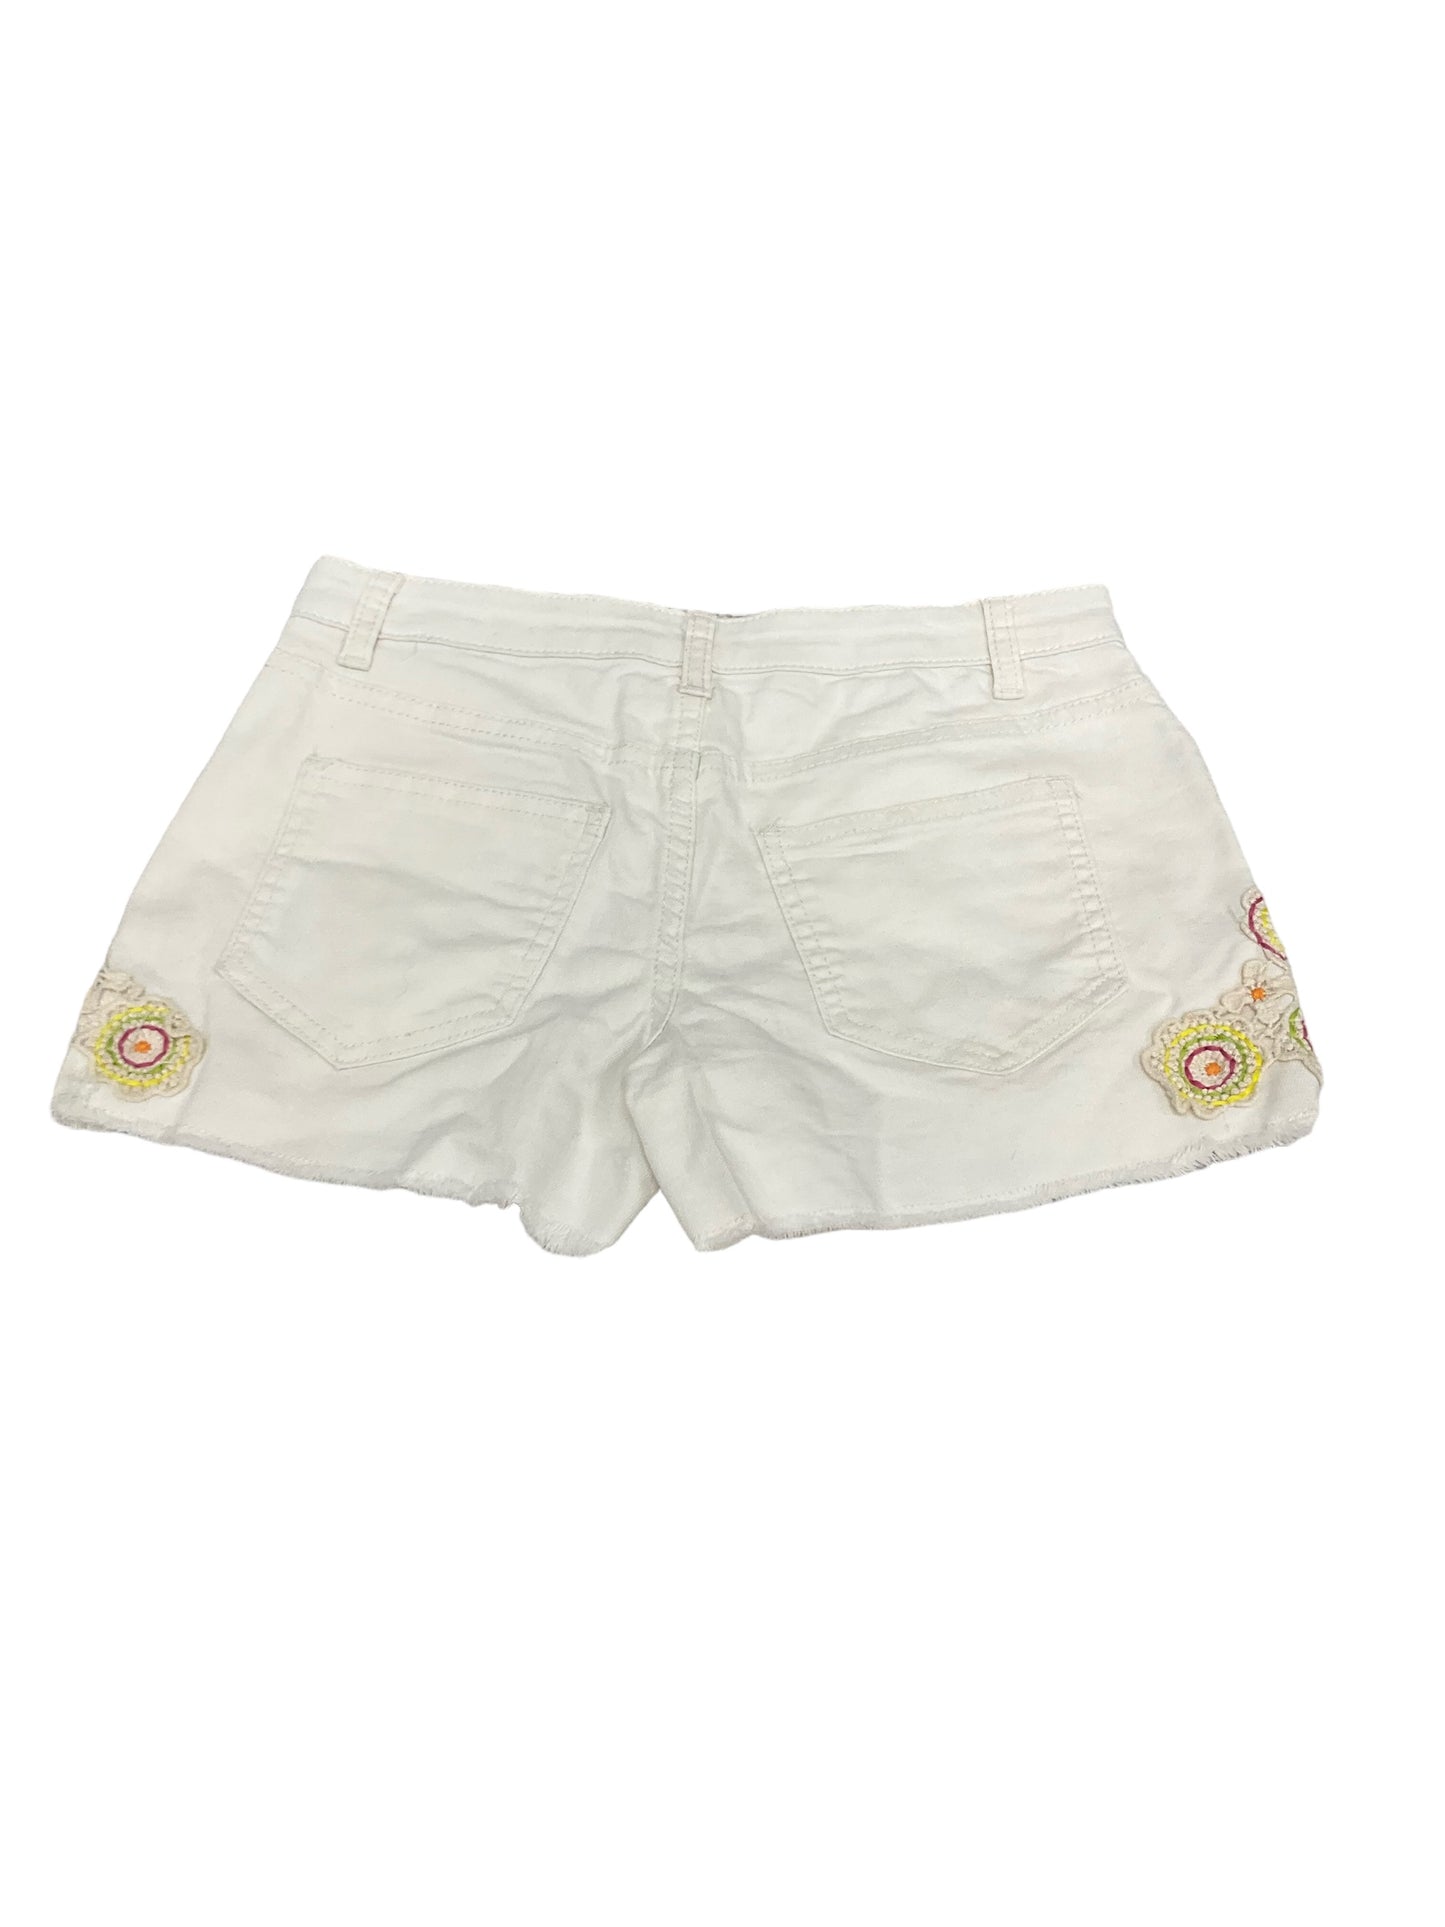 Shorts By Lc Lauren Conrad  Size: 2